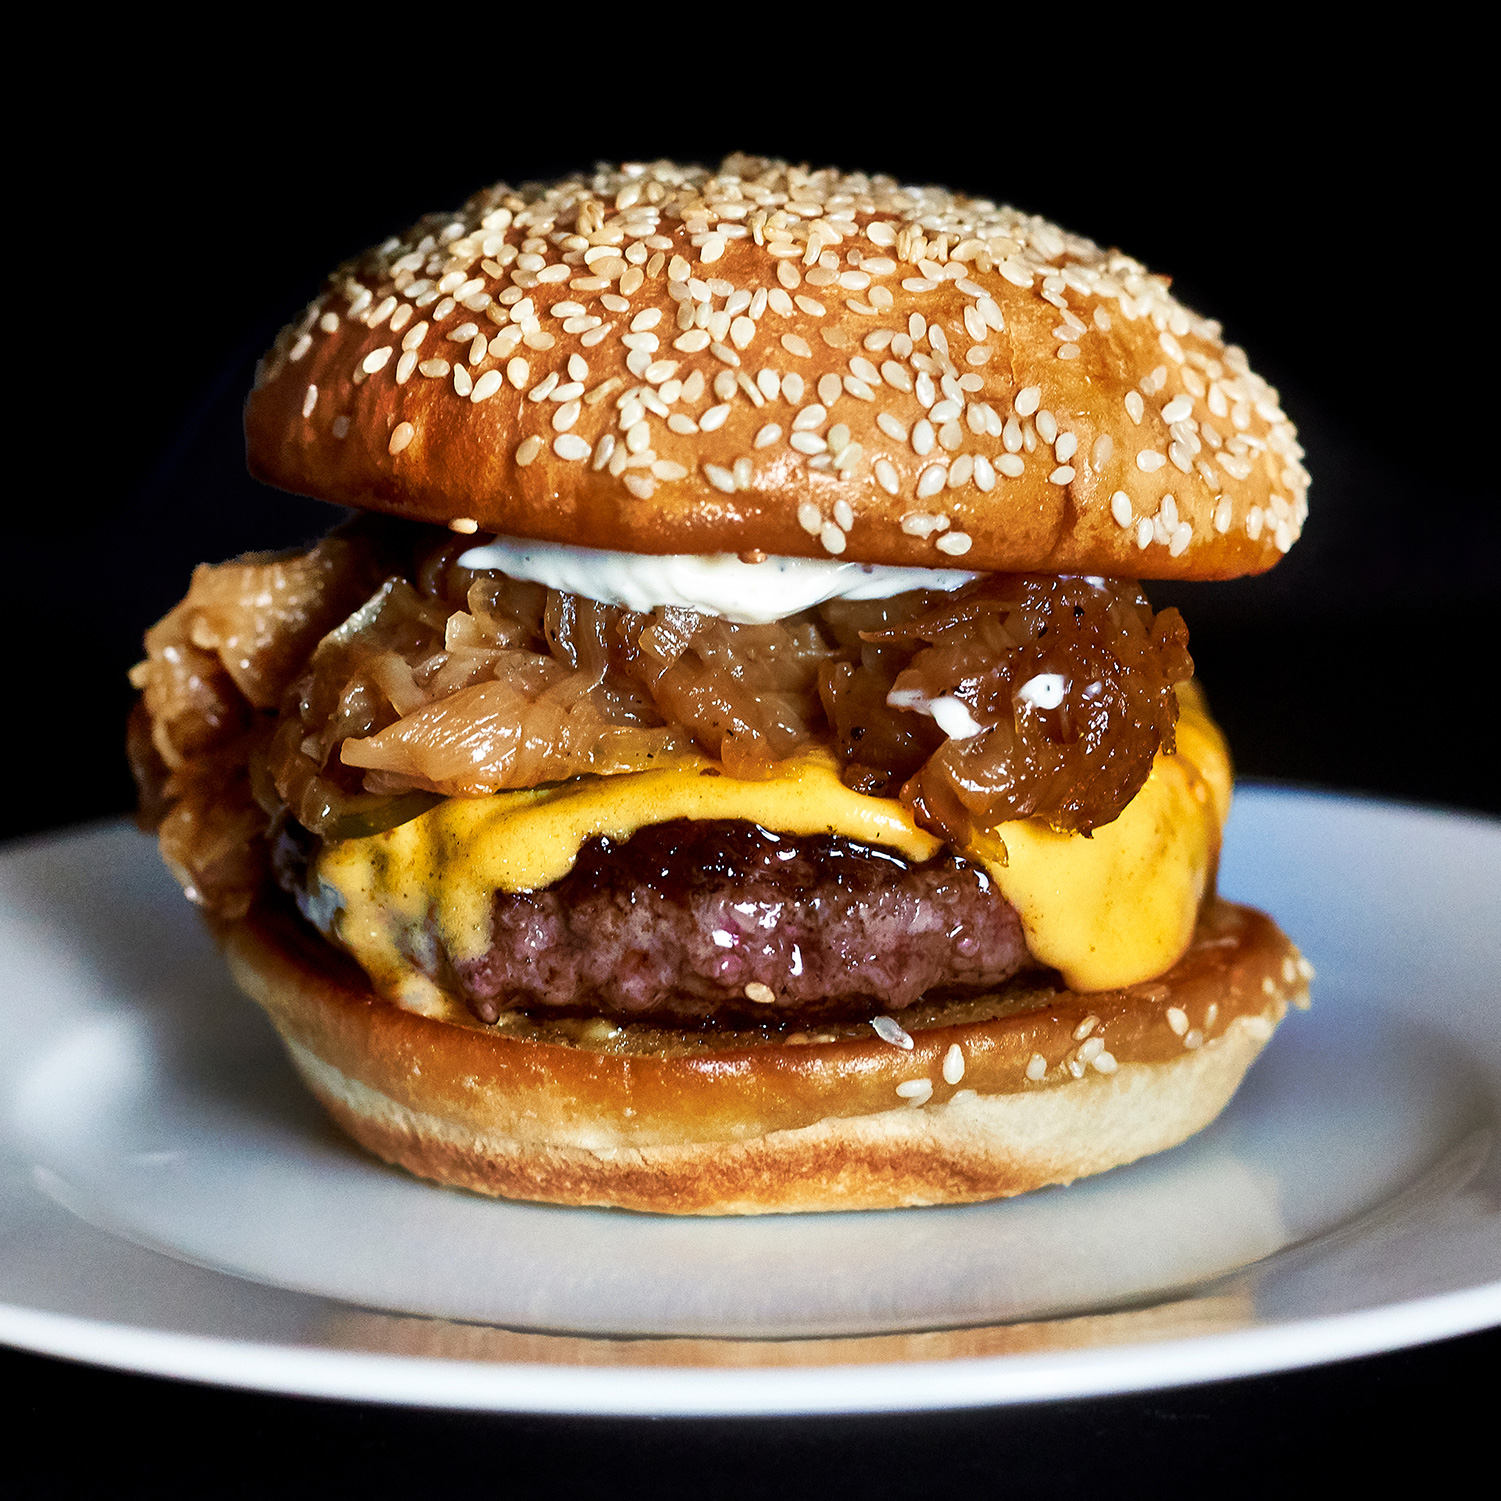 A Richard Eaglespoon burger on a black background and also on a plate. Featuring a Martin’s Big Marty bun and more caramelized onions than sense.